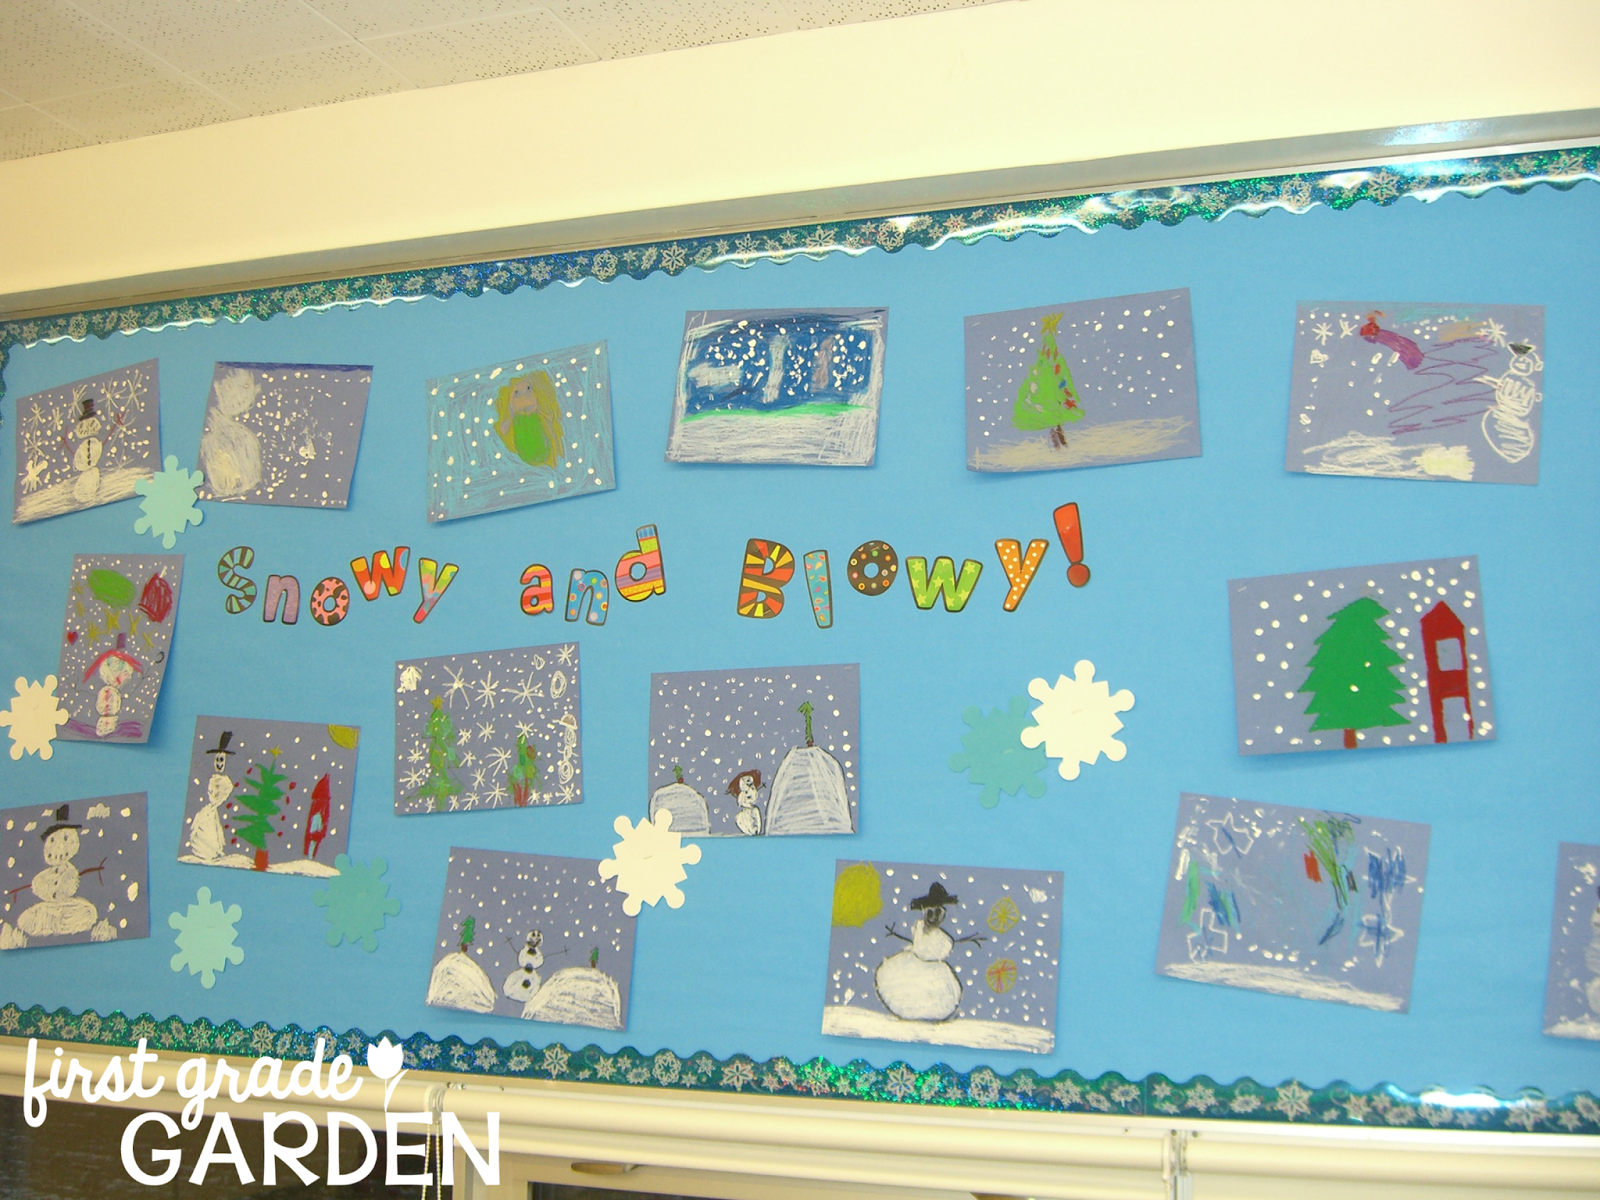 First Grade Garden: Christmas Blast From the Past